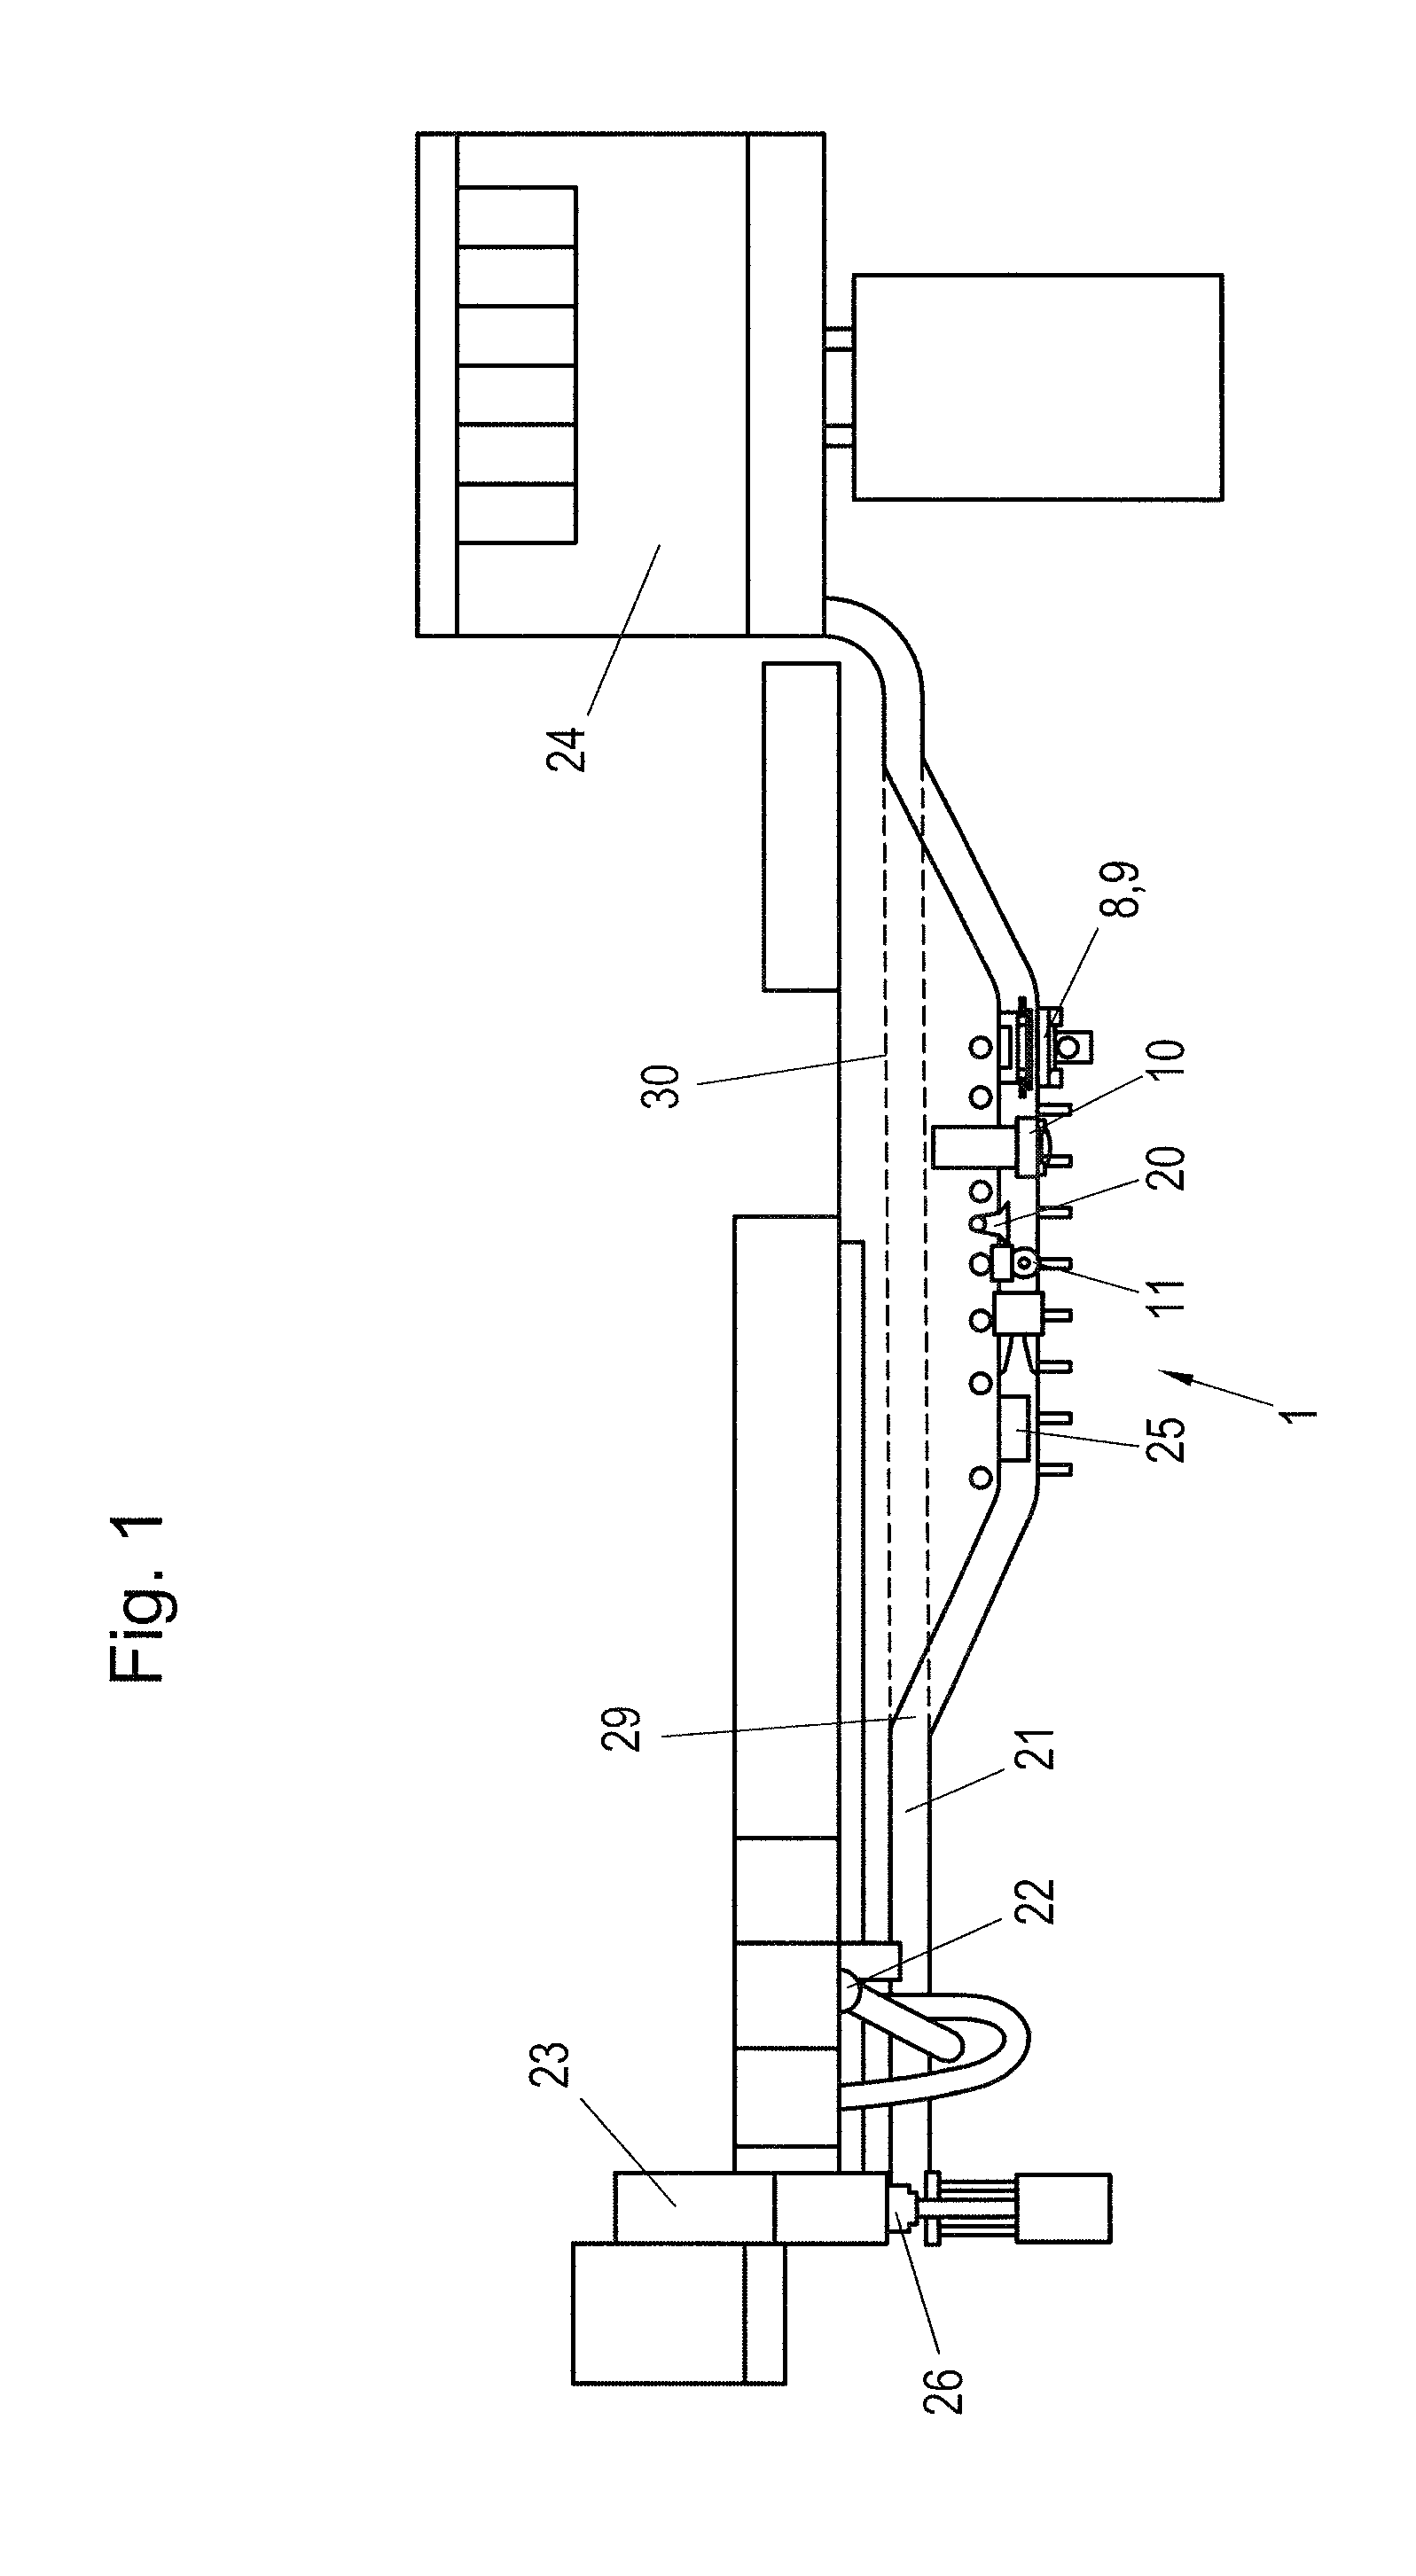 Closing apparatus for closing preferably bag-type packaging units